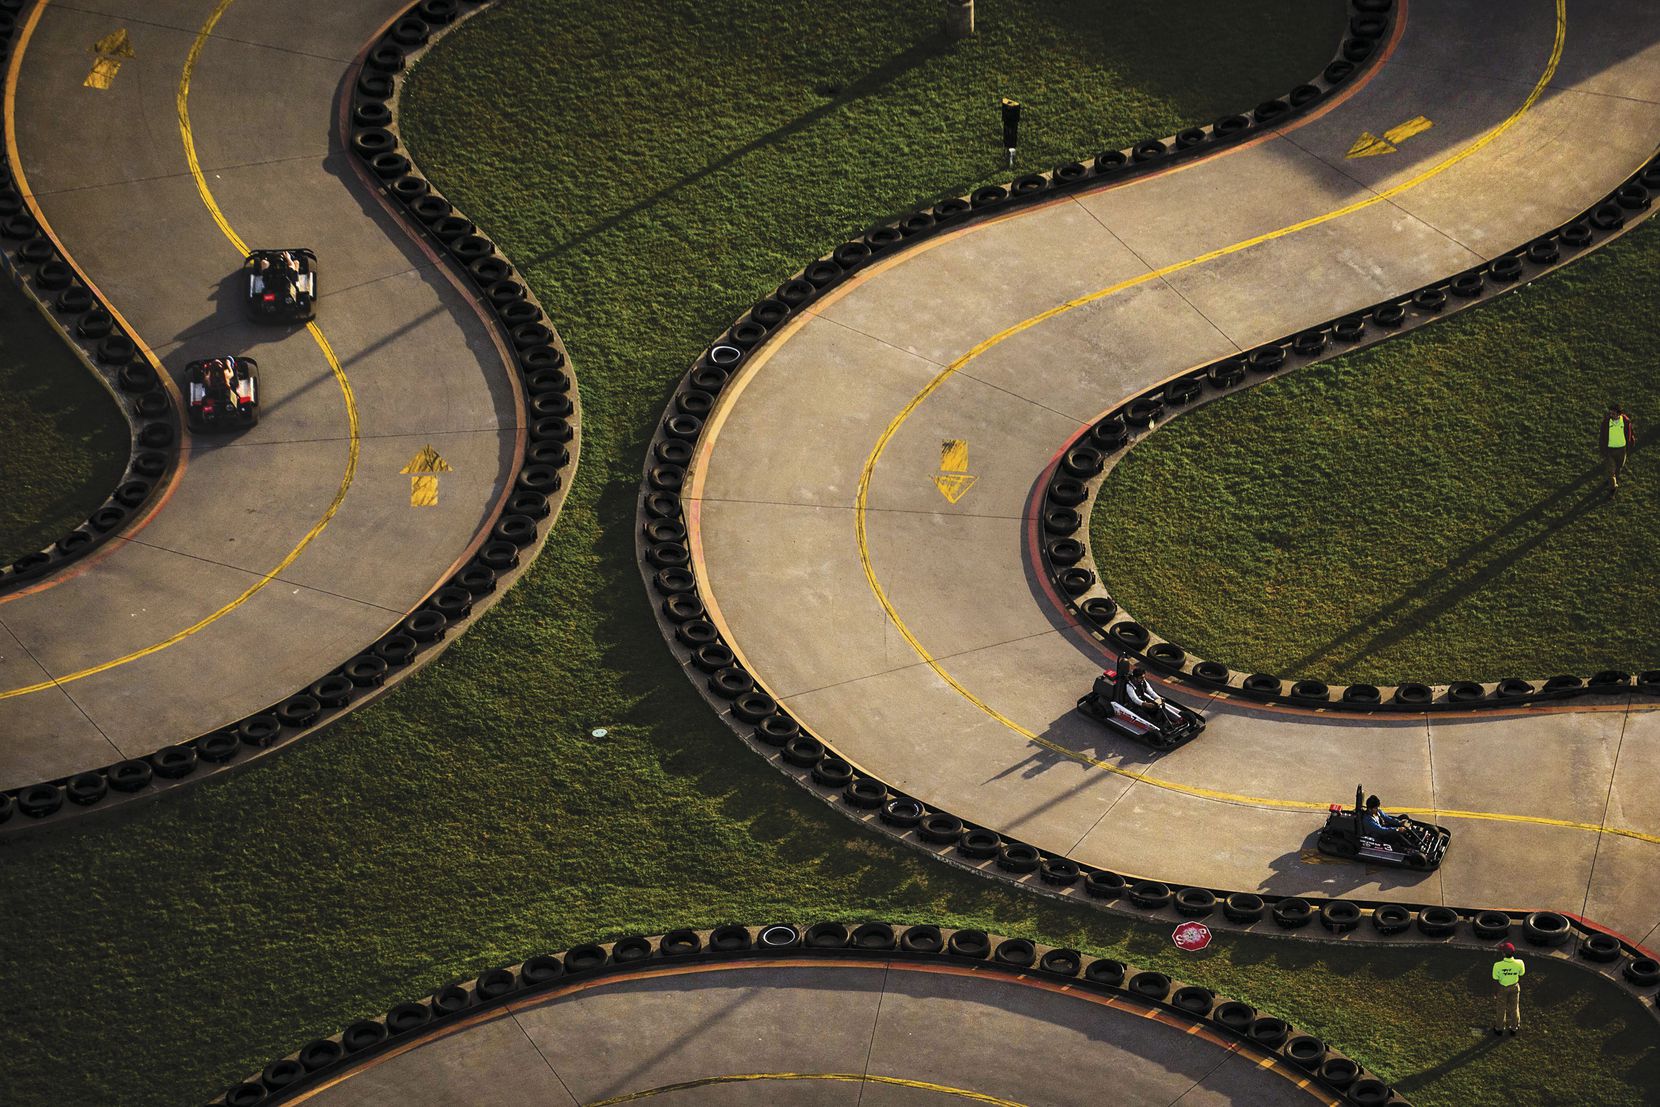 Go-kart drivers zip around the track at Zone Action Park in Lewisville.